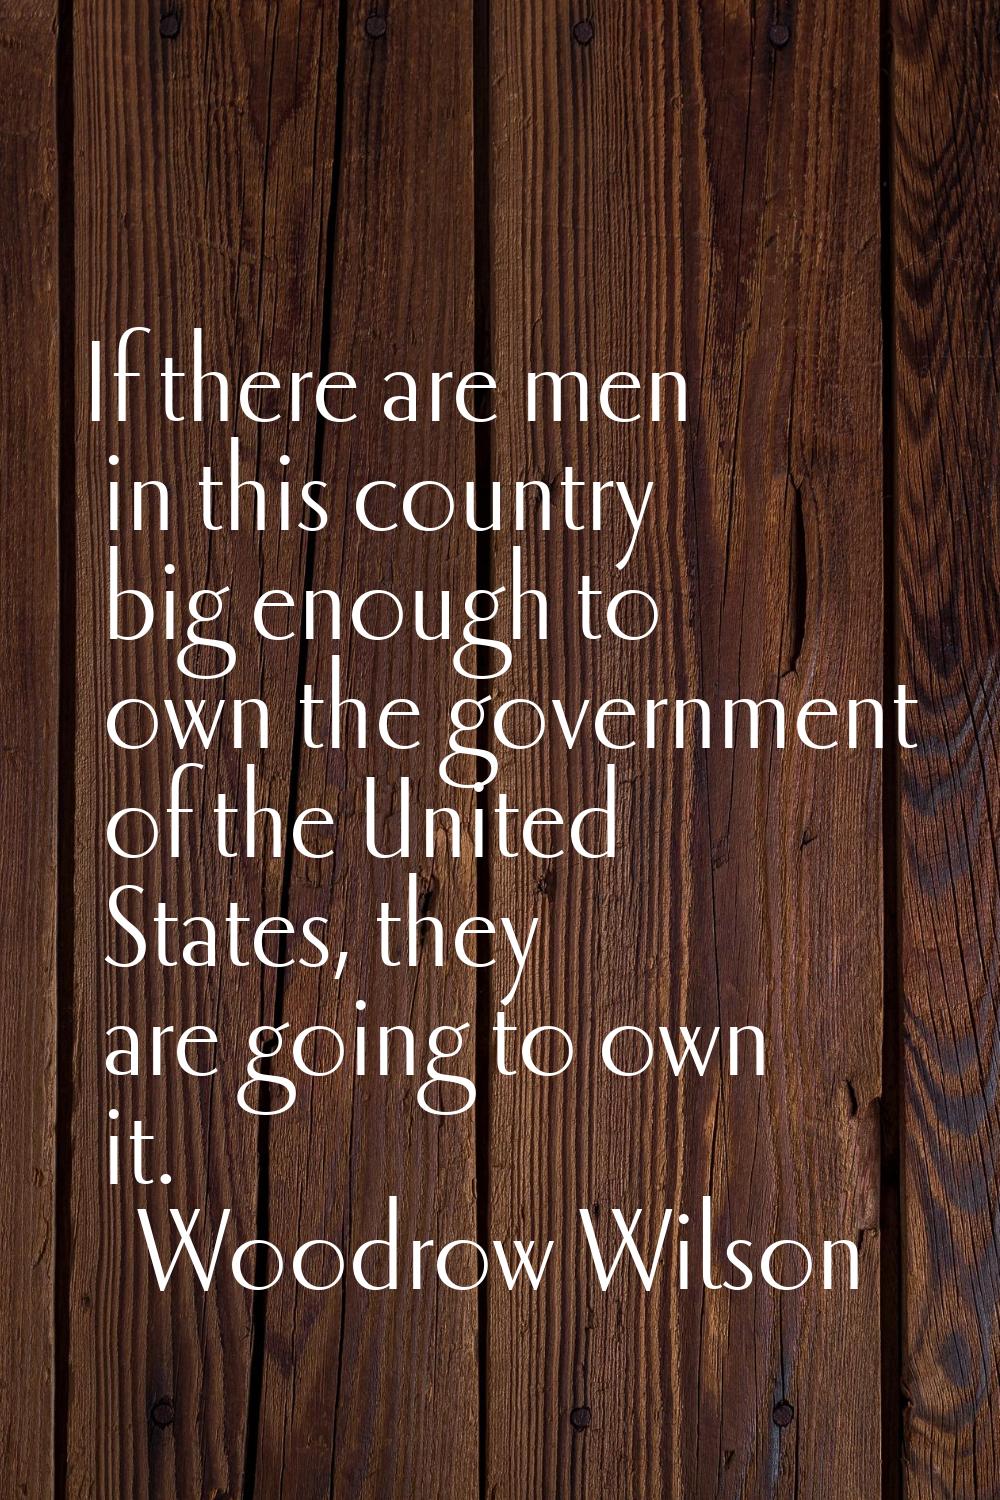 If there are men in this country big enough to own the government of the United States, they are go